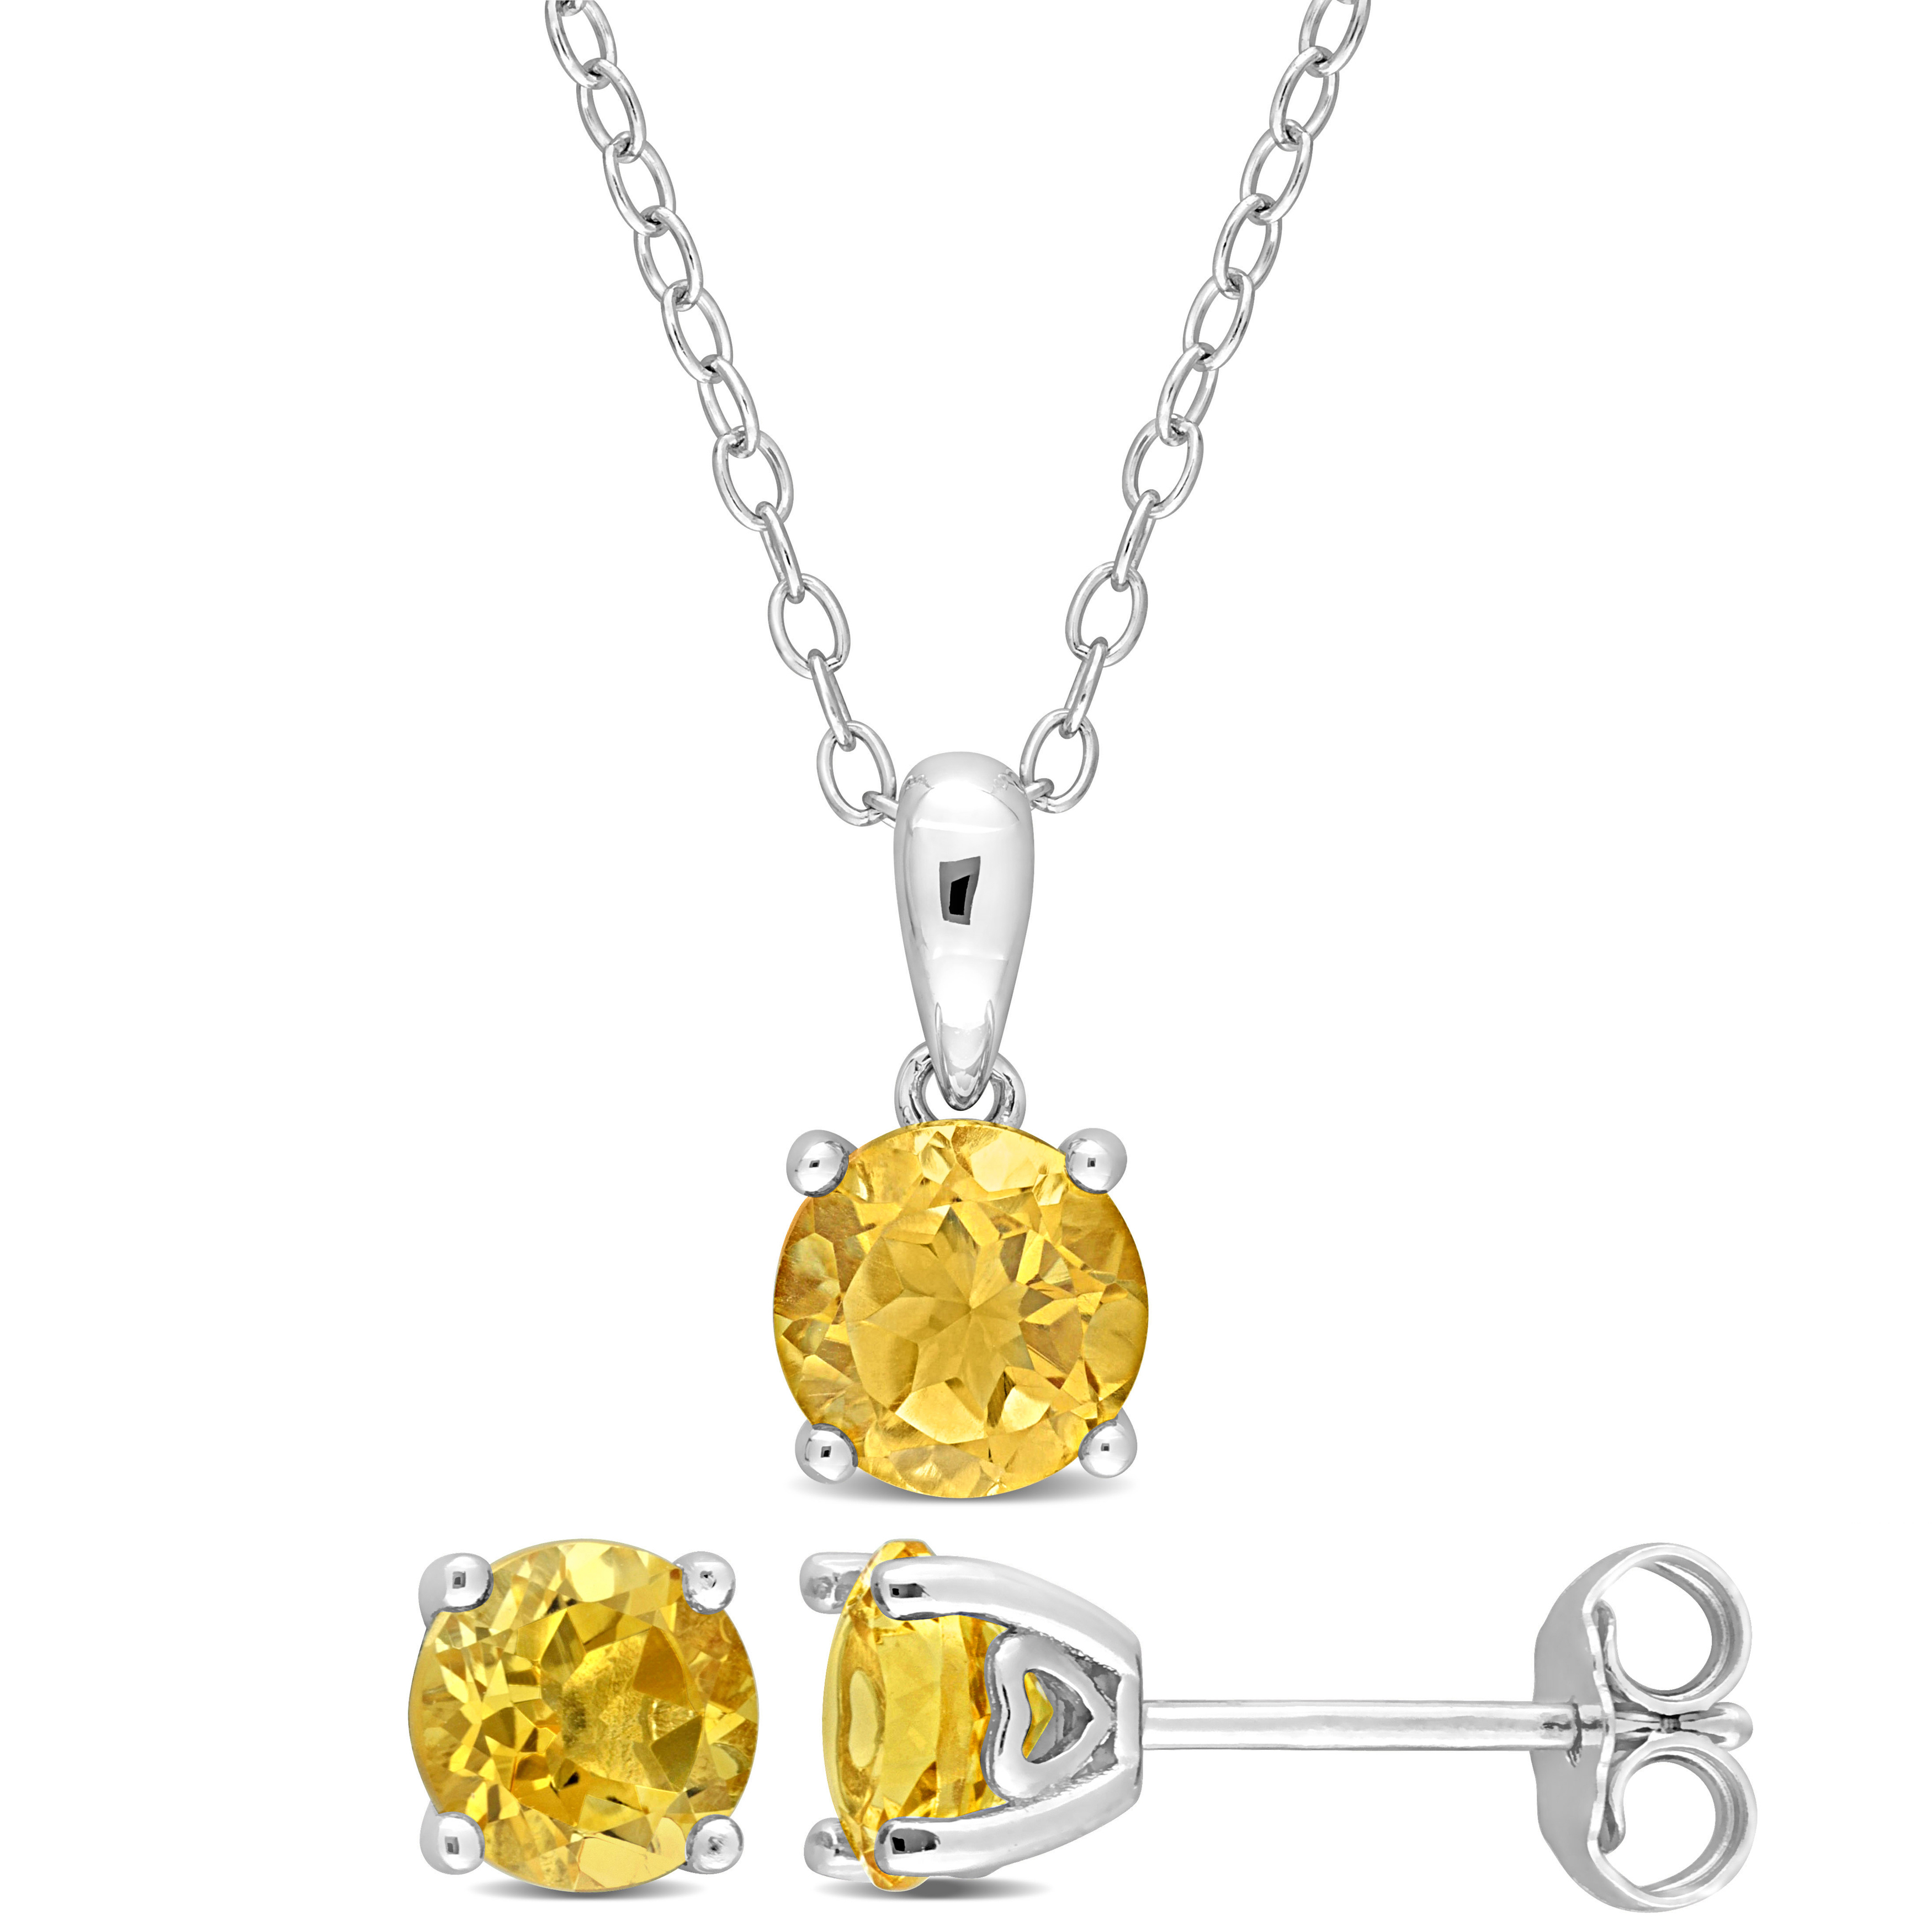 2 1/3 CT TGW Citrine 2-Piece Set of Pendant with Chain and Earrings in Sterling Silver